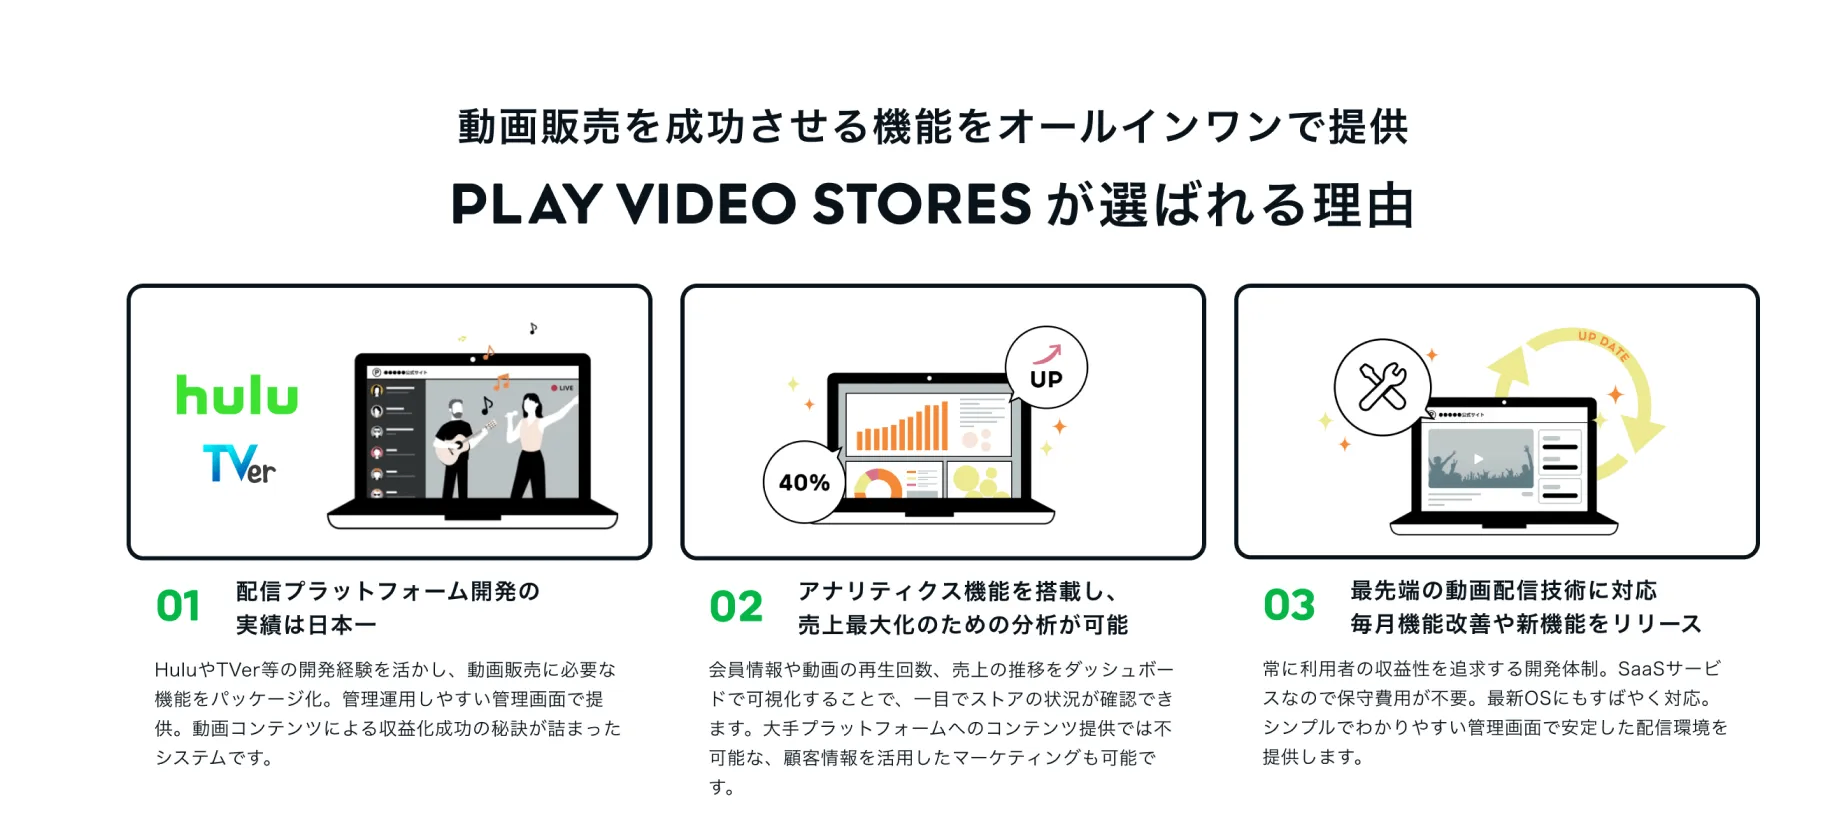 PLAY VIDEO STORES紹介画像の2枚目